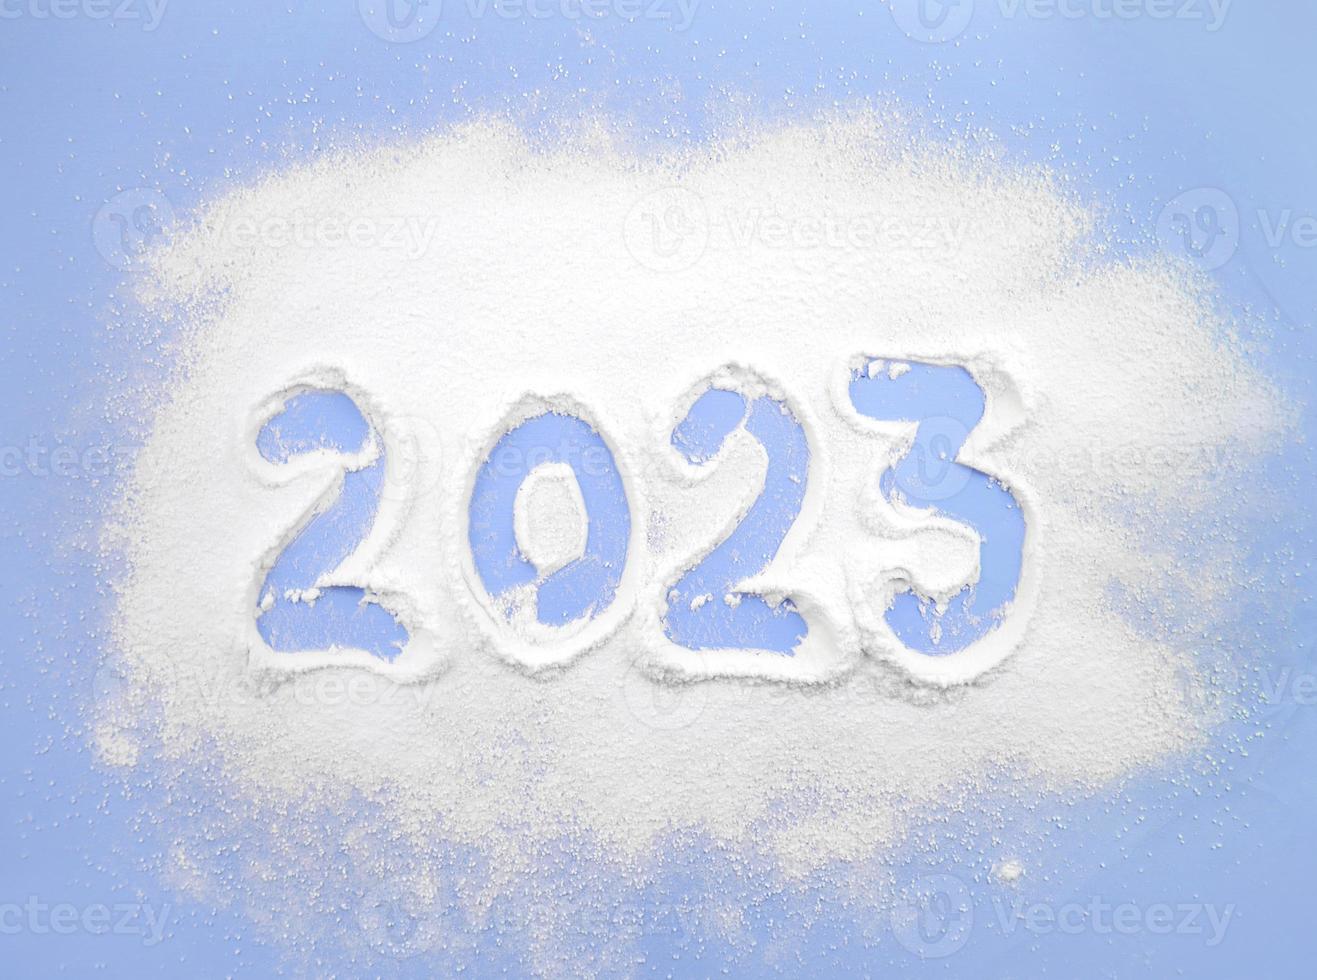 Christmas background with snow. 2023 is written on a white powder on a blue background. Powdered sugar new year photo